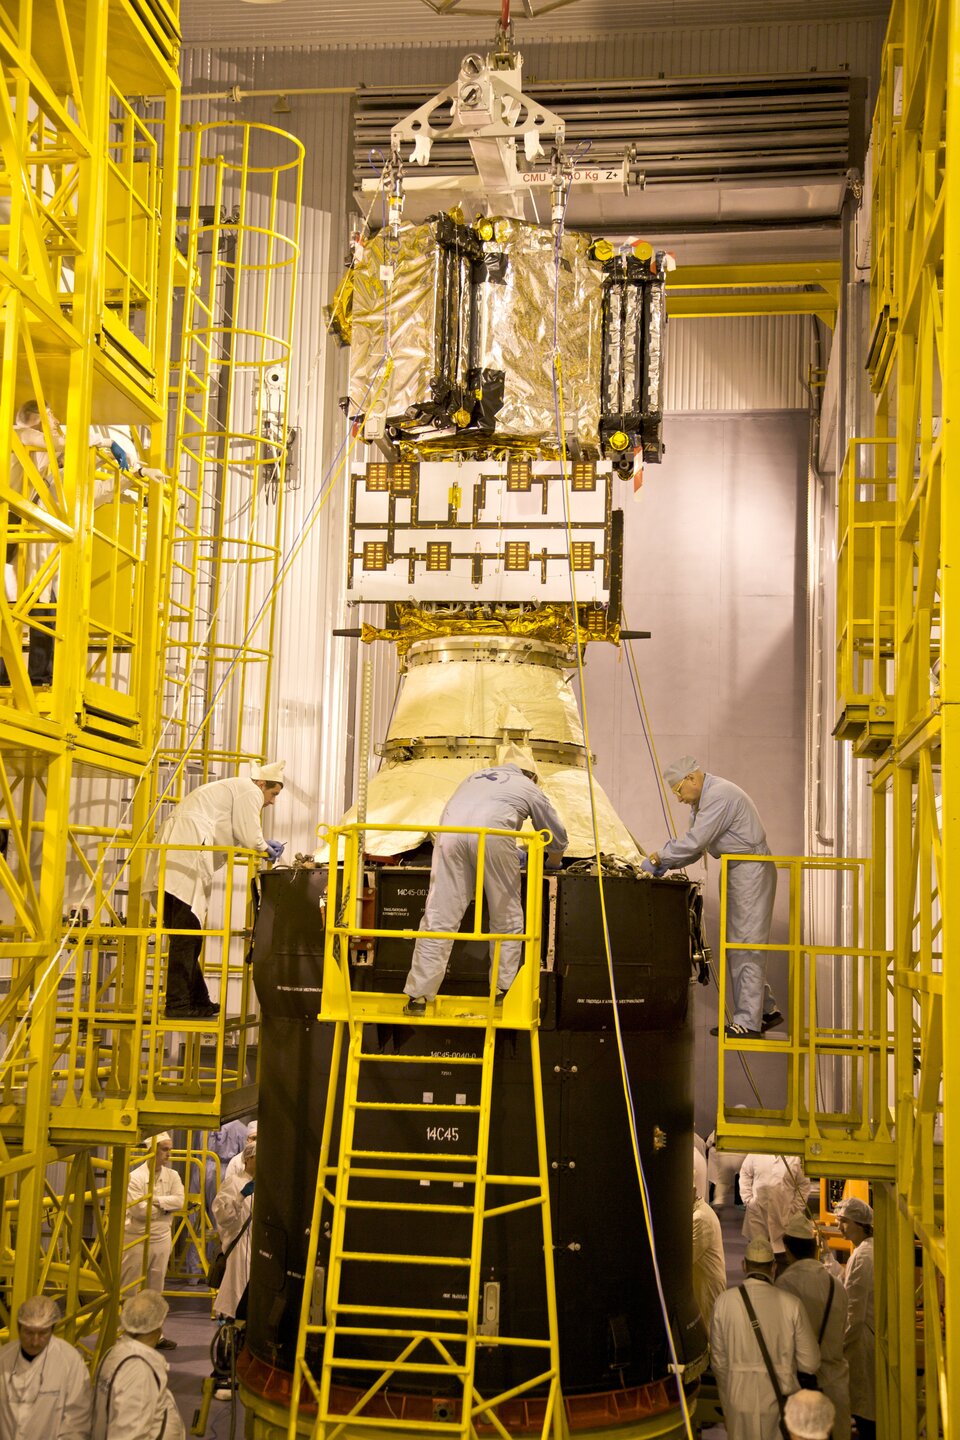 SMOS being secured on upper stage